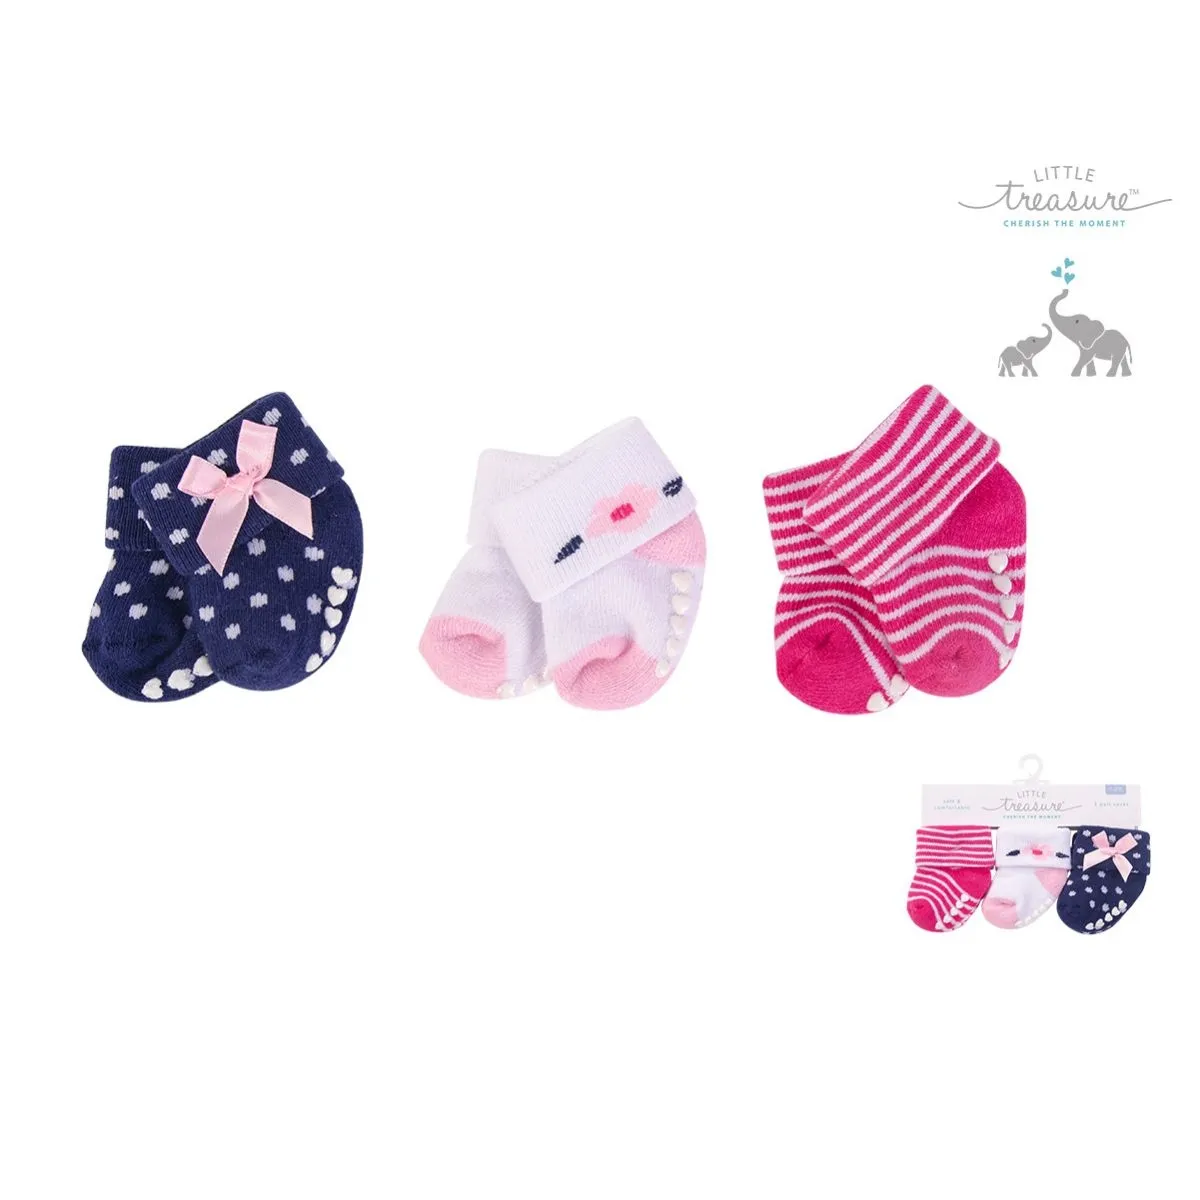 Little Treasure Baby Socks Set - 3 PK Baby Girls Terry Socks with Non-skid Cotton Fabric No.76223CH